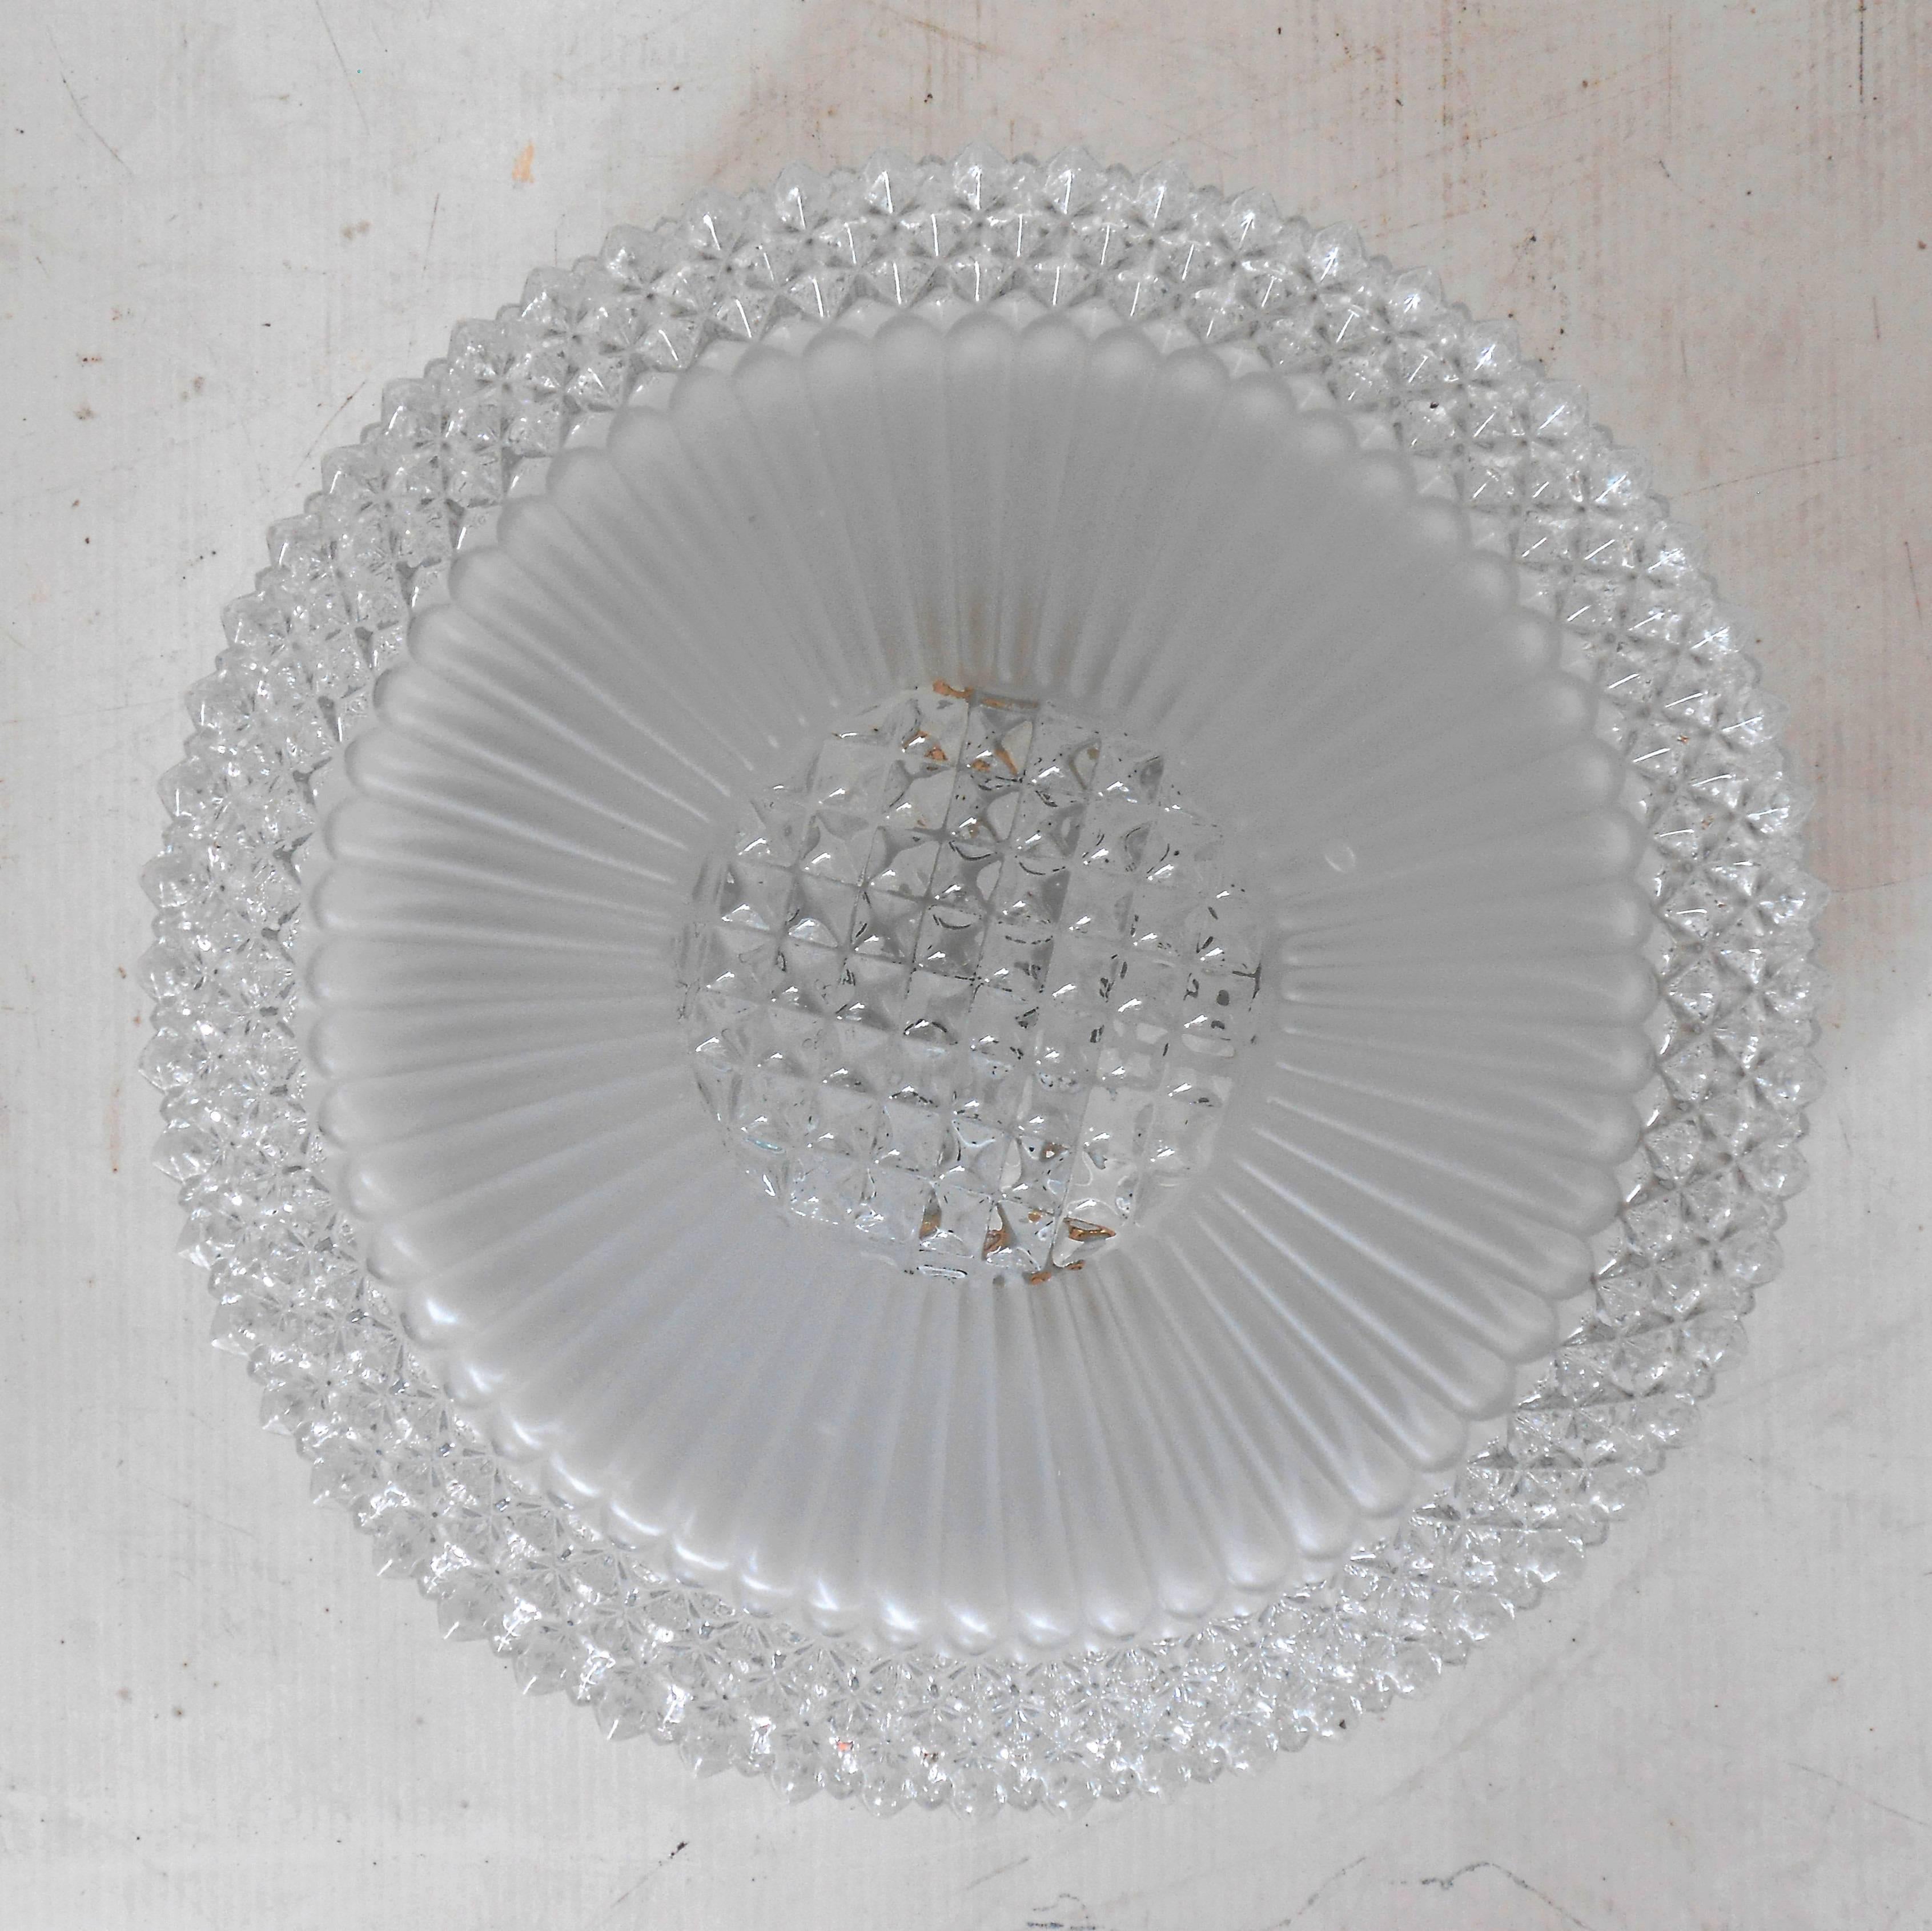 Italian vintage flush mount with clear textured Murano glass. / Made in Italy in the 1960's.
2 lights / max 40W each
Diameter: 11.5 inches / Height: 4 inches
1 in stock in Palm Springs currently ON SALE for $599!!!
Order Reference #: C208